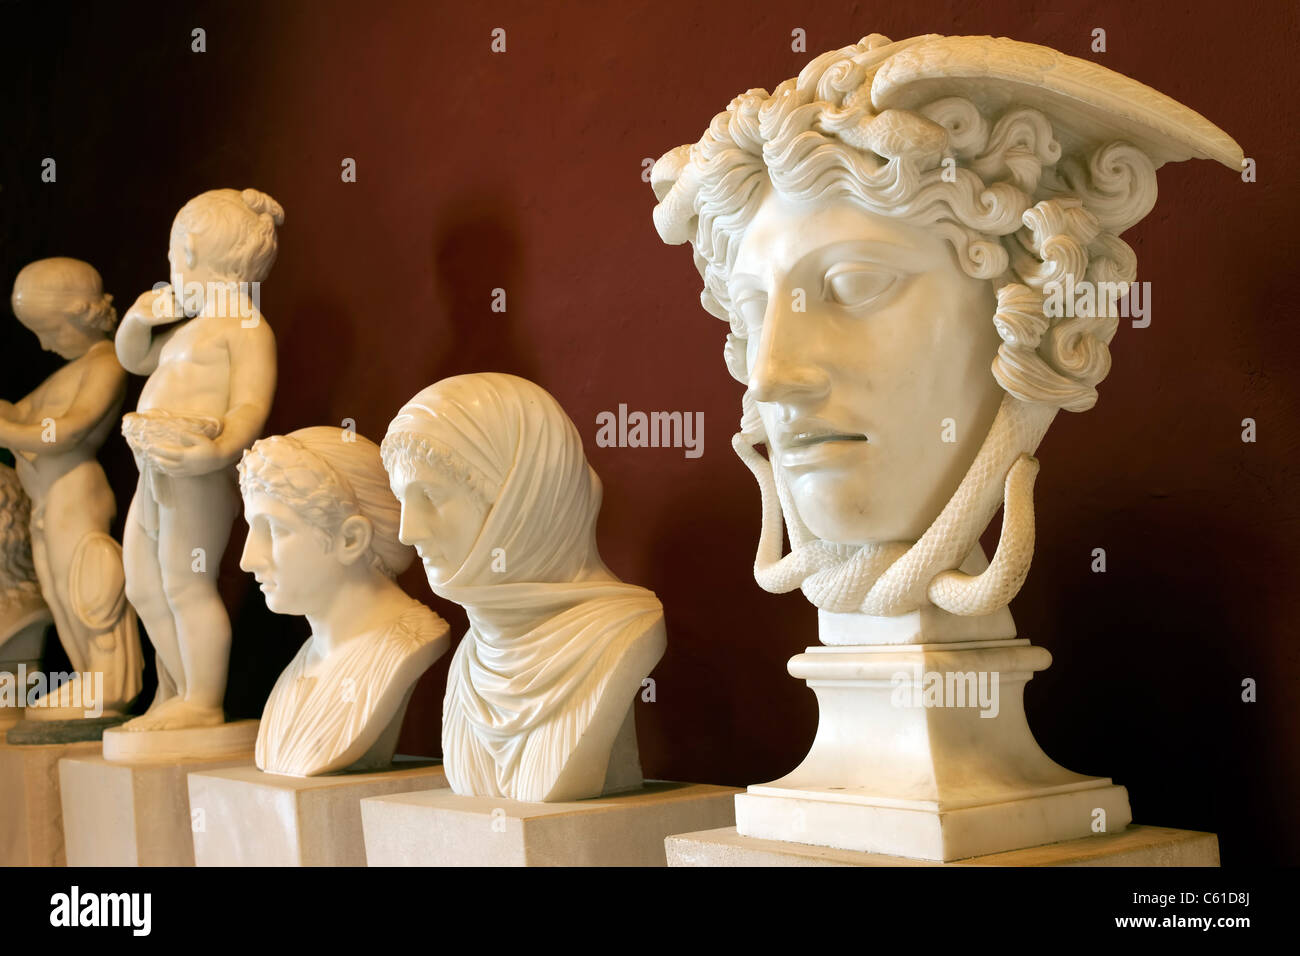 Ancient or antique Roman or Greek bust sculptures in museum at the Bellver Castle in Palma, Mallorca. Stock Photo